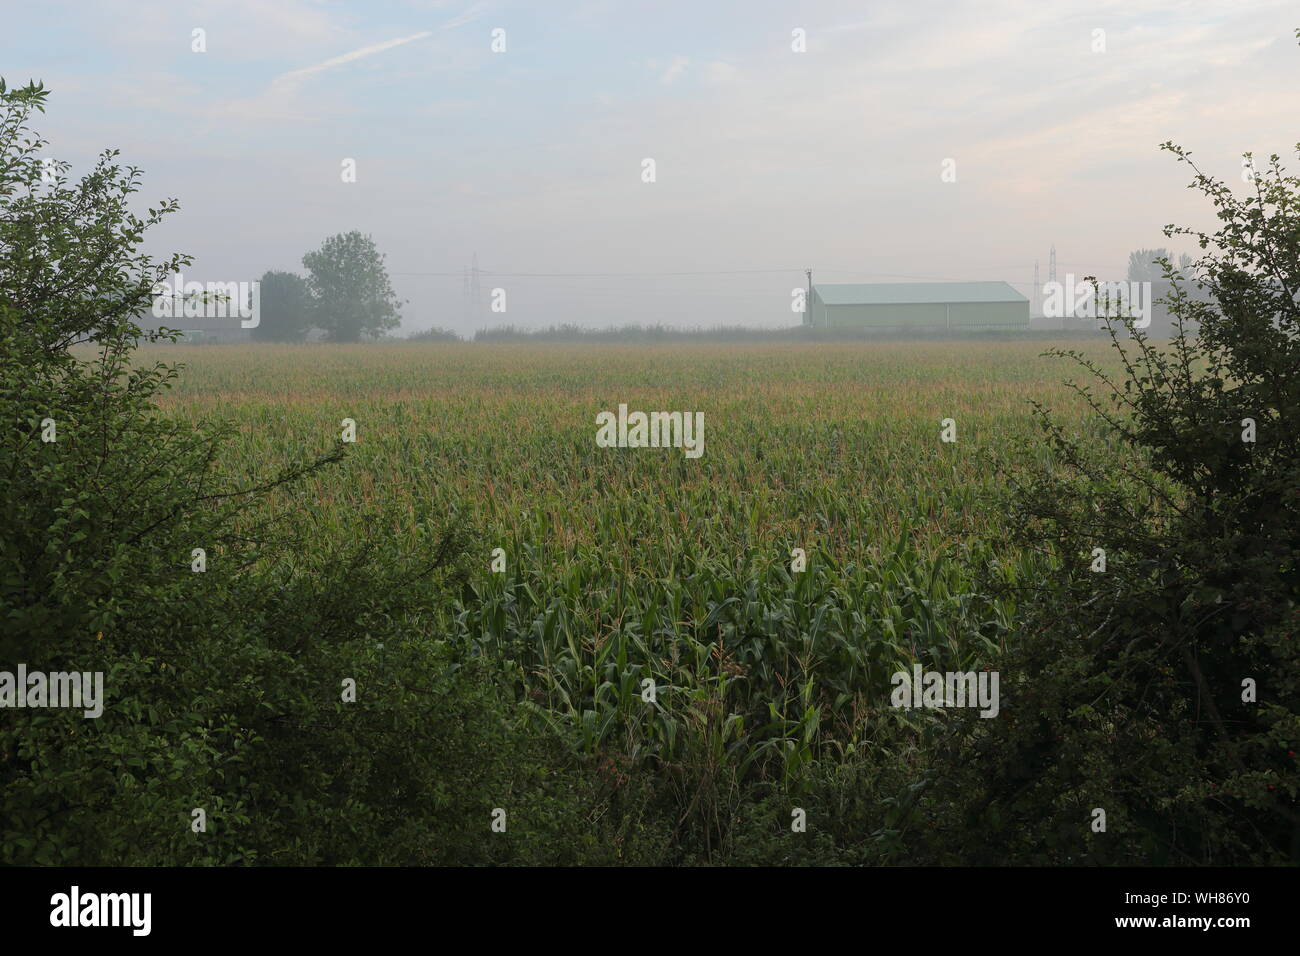 Misty Vista at Winterton showing a barn in the mist beyond a corn field Stock Photo